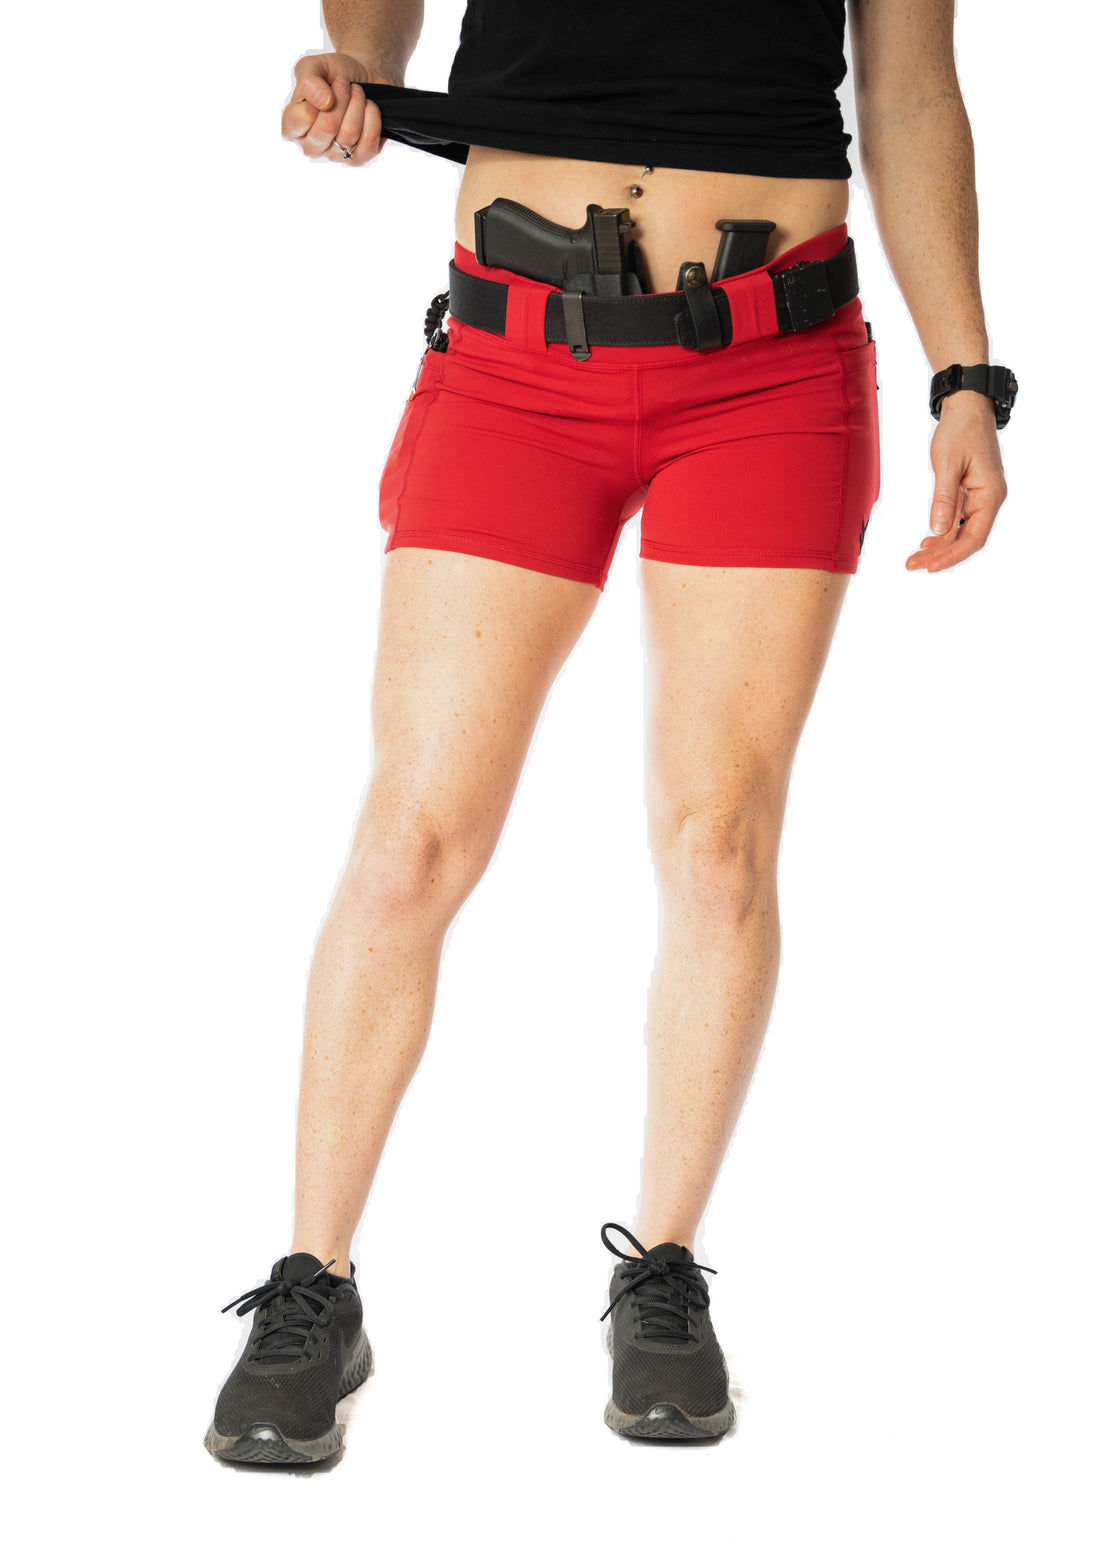 Women's Compression Carry Shorts - Chili